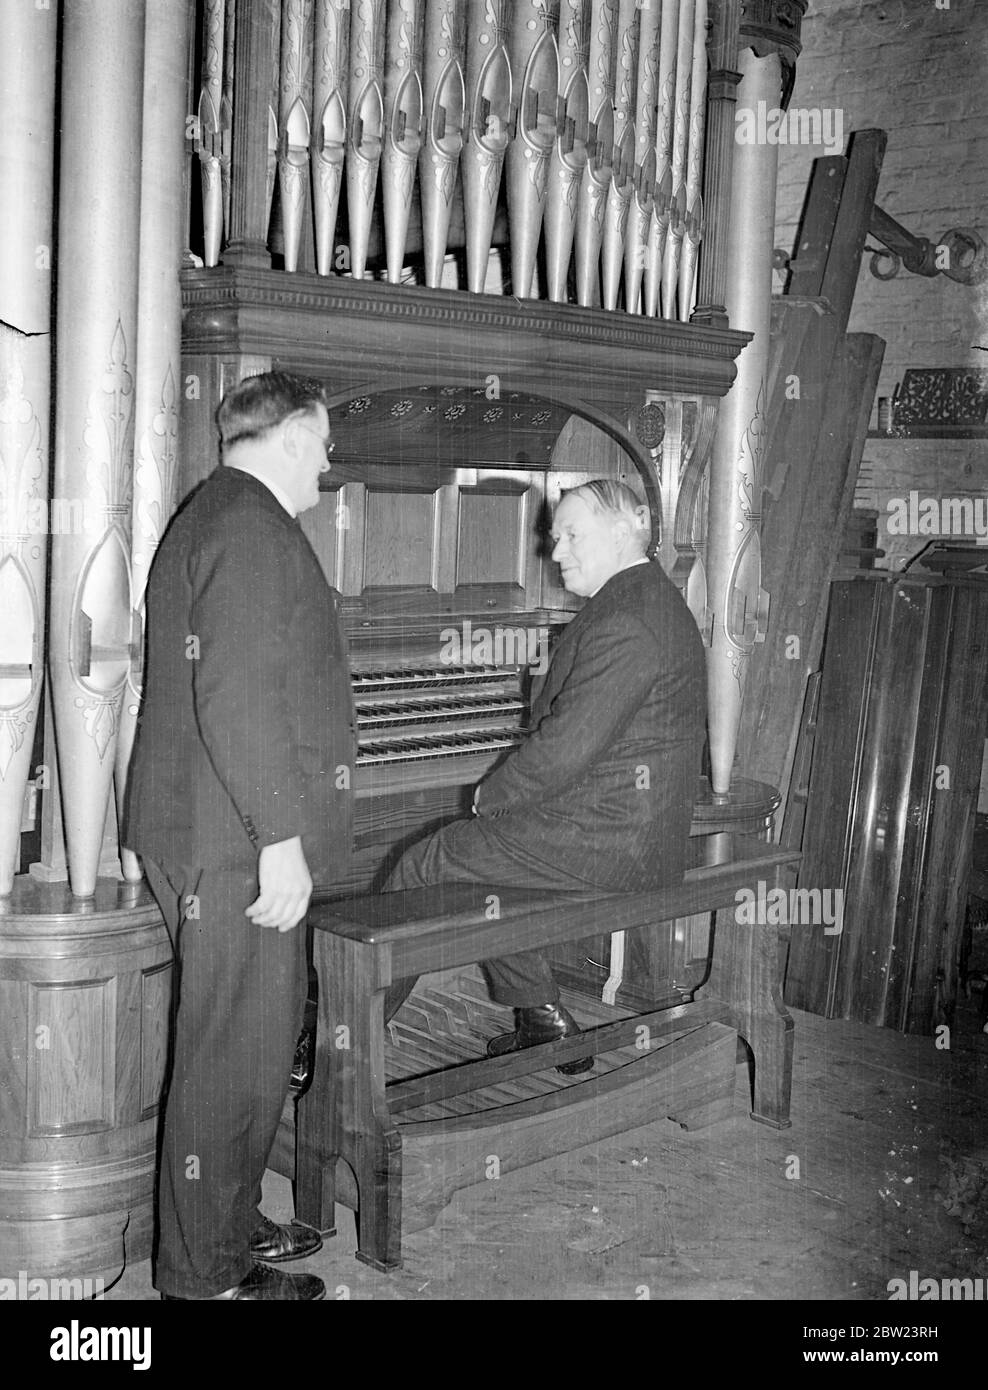 London man gives Â£1600 organ to Cambridgeshire church. Owing to the generosity of a London man, Doddington (Cambridgeshire) parish church will soon celebrate its 1000th birthday with a new organ. The church, which has a director's roll going back to 1282, was once the richest in the country, but it has grown so poor that though a new organ was badly needed no one could raise the money. Now, in response to an appeal of the Rector , the Rev Richard Ridge, the church has been given an organ by Mr F. C. Nunn, a 78-year-old Dulwich bachelor. The organ, three manual instrument, is 49 years old, but Stock Photo